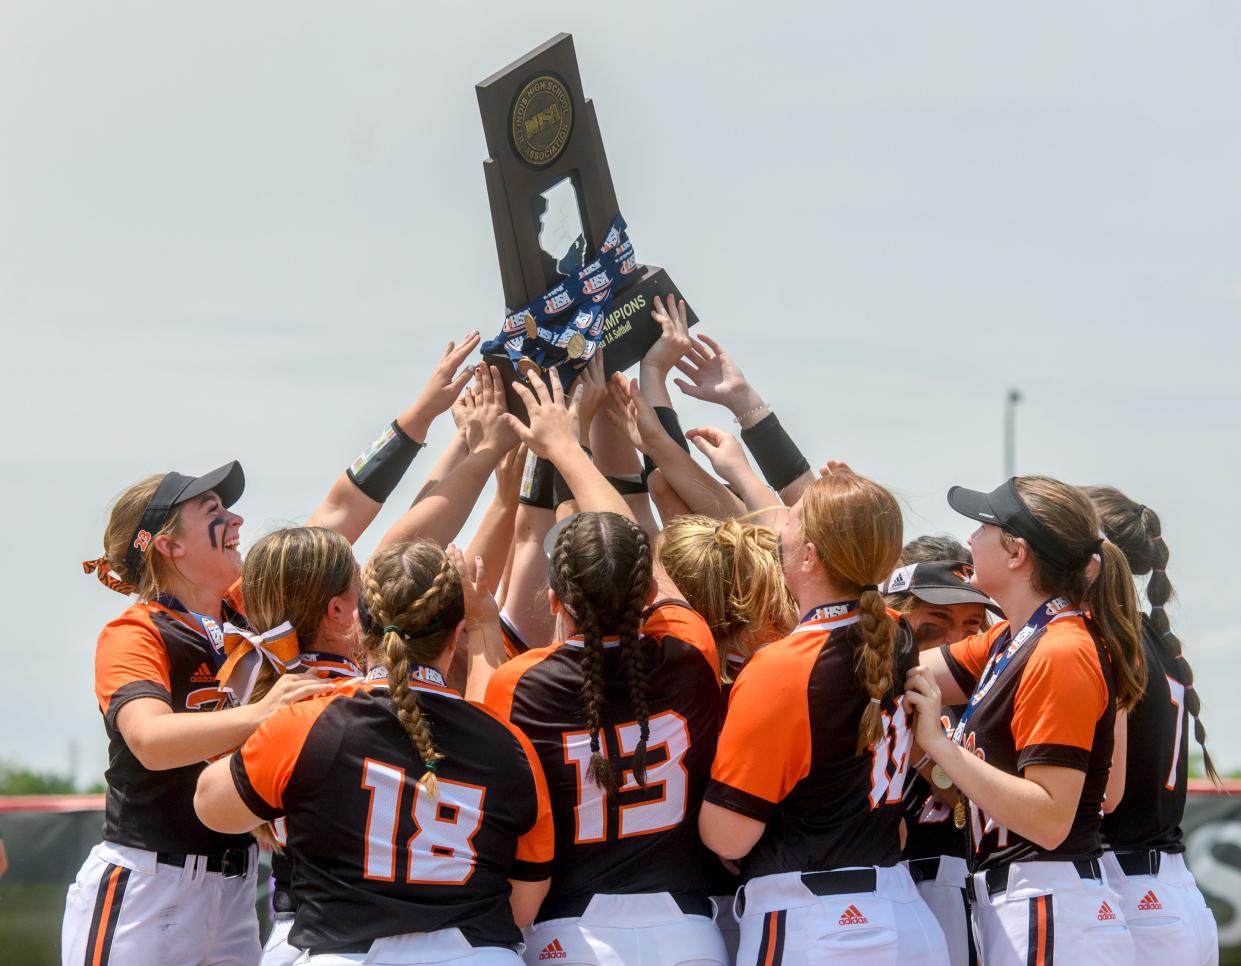 The Illini Bluffs Tigers reach out to touch their Class 1A state softball championship trophy after defeating Casey-Westfield 1-0 in nine innings Saturday, June 4, 2022 at the Louisville Slugger Sports Complex in Peoria. The Tigers defended their 2022 title with a walk-off RBI from junior Lilly Hicks and a one-hit performance from senior pitcher Kierston McCoy.